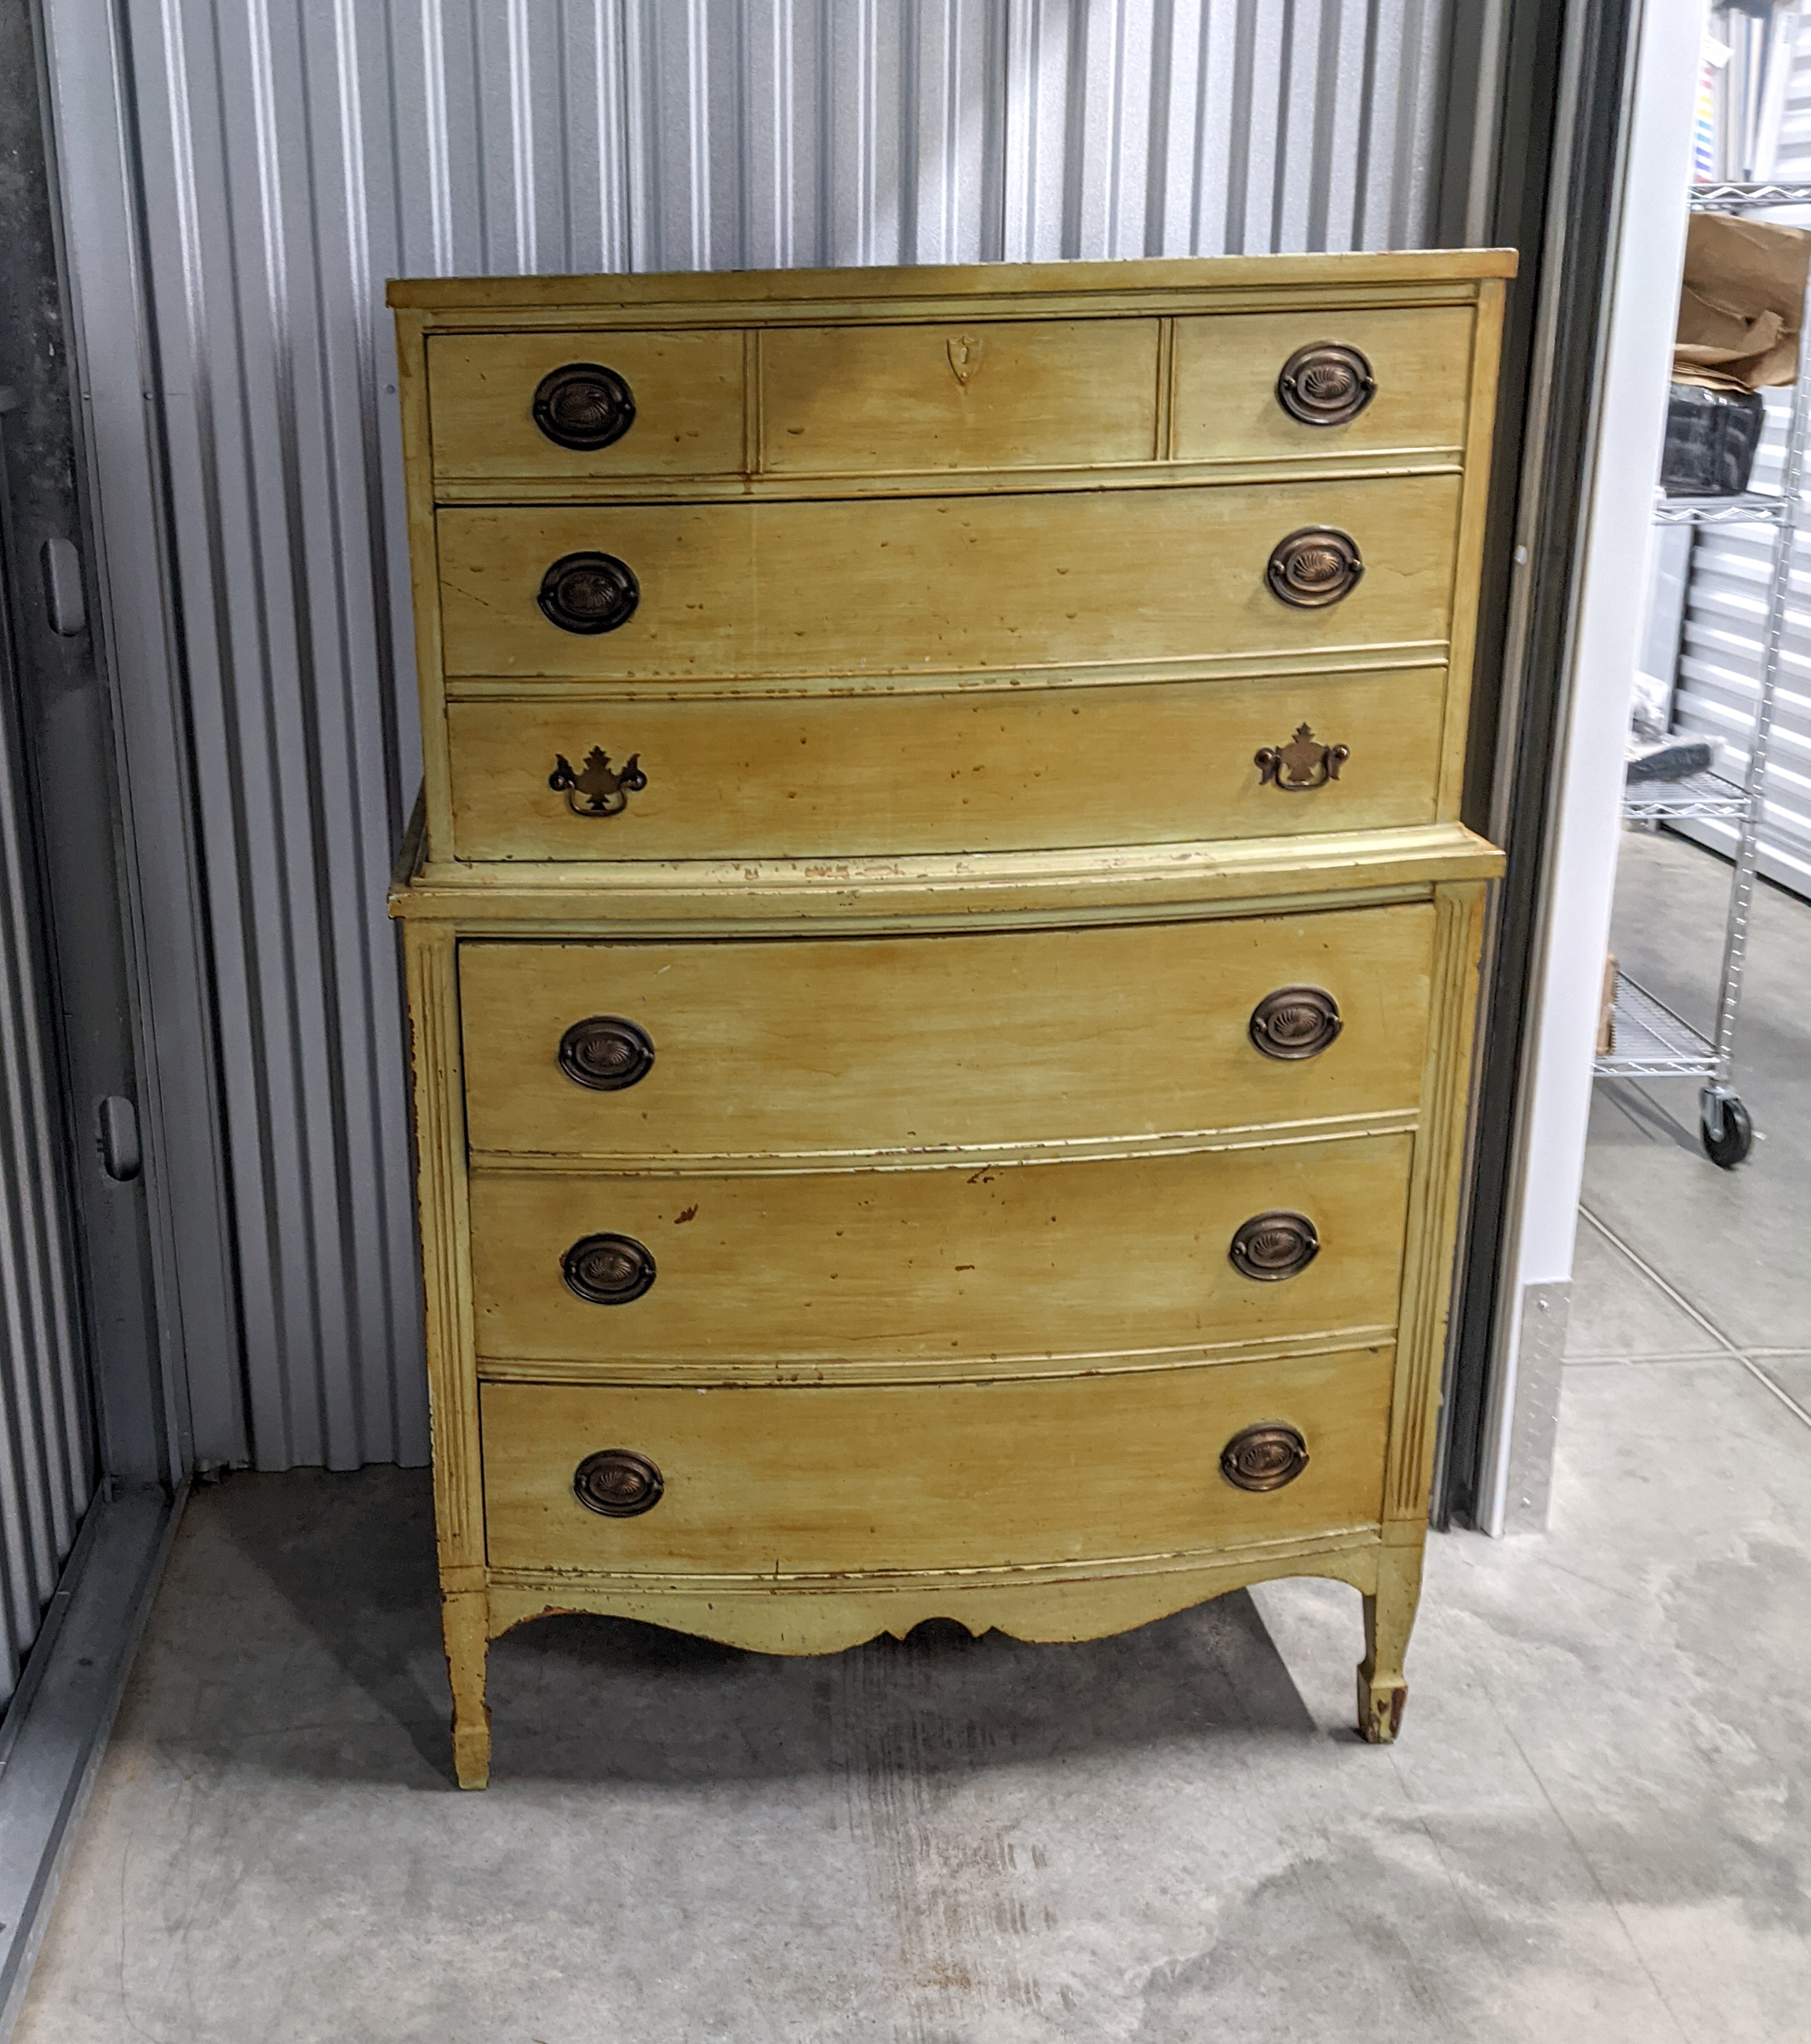 This yellow dresser in a storage unit smelled heavily of smoke odors.